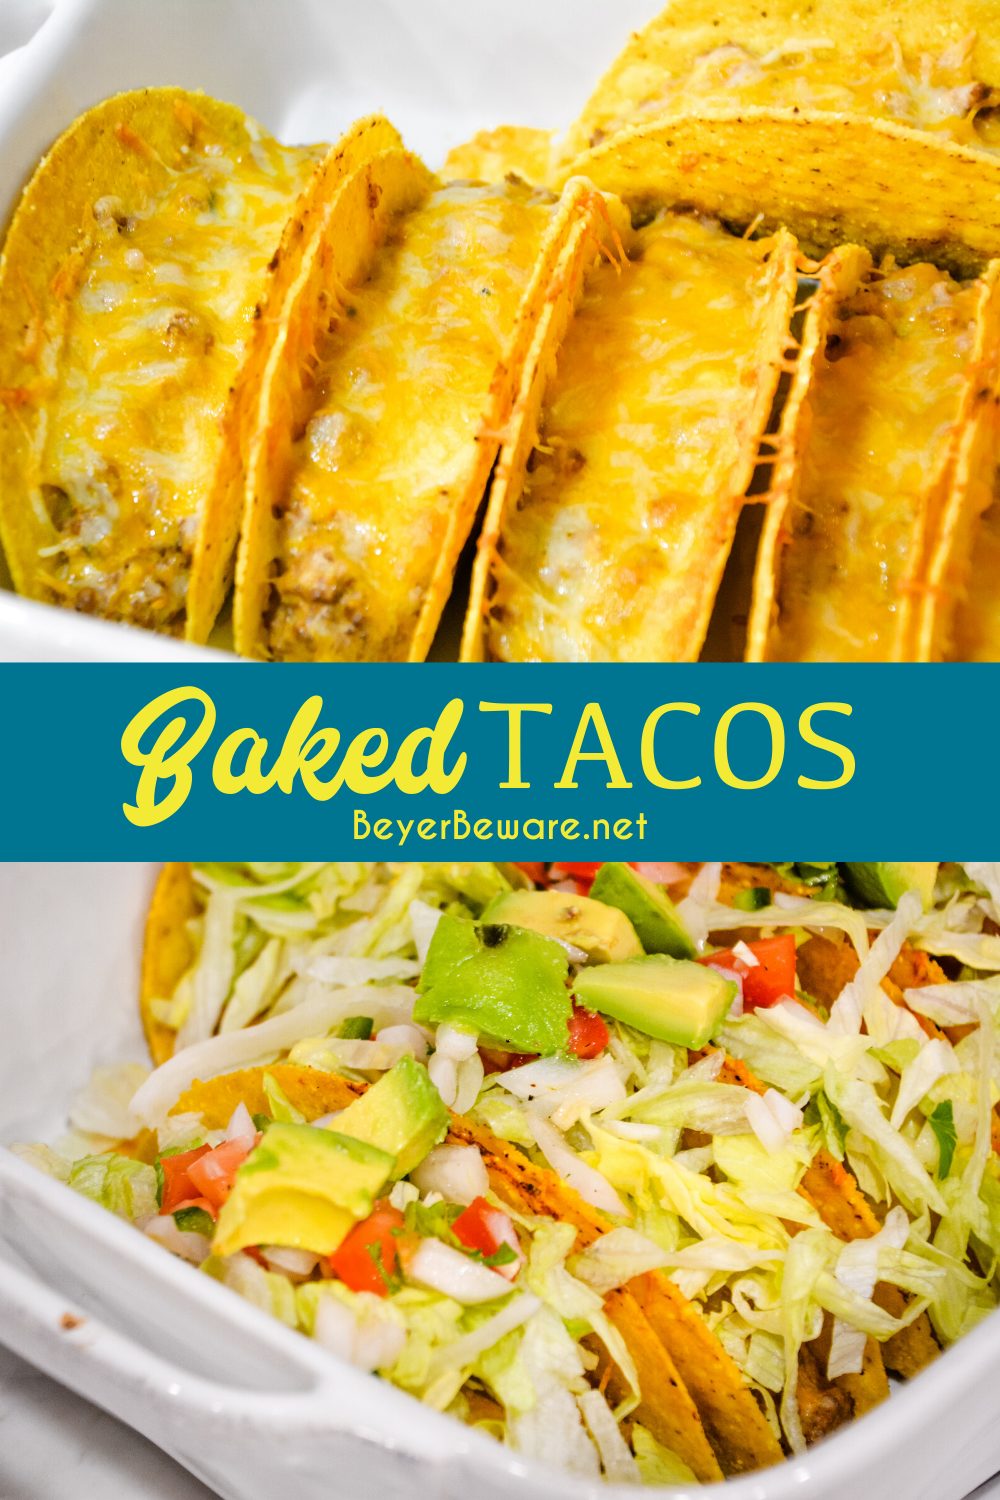 Creamy ground beef baked tacos are made with corn or flour shells, ground beef, taco seasoning, cream cheese, and salsa before topping with shredded cheese.